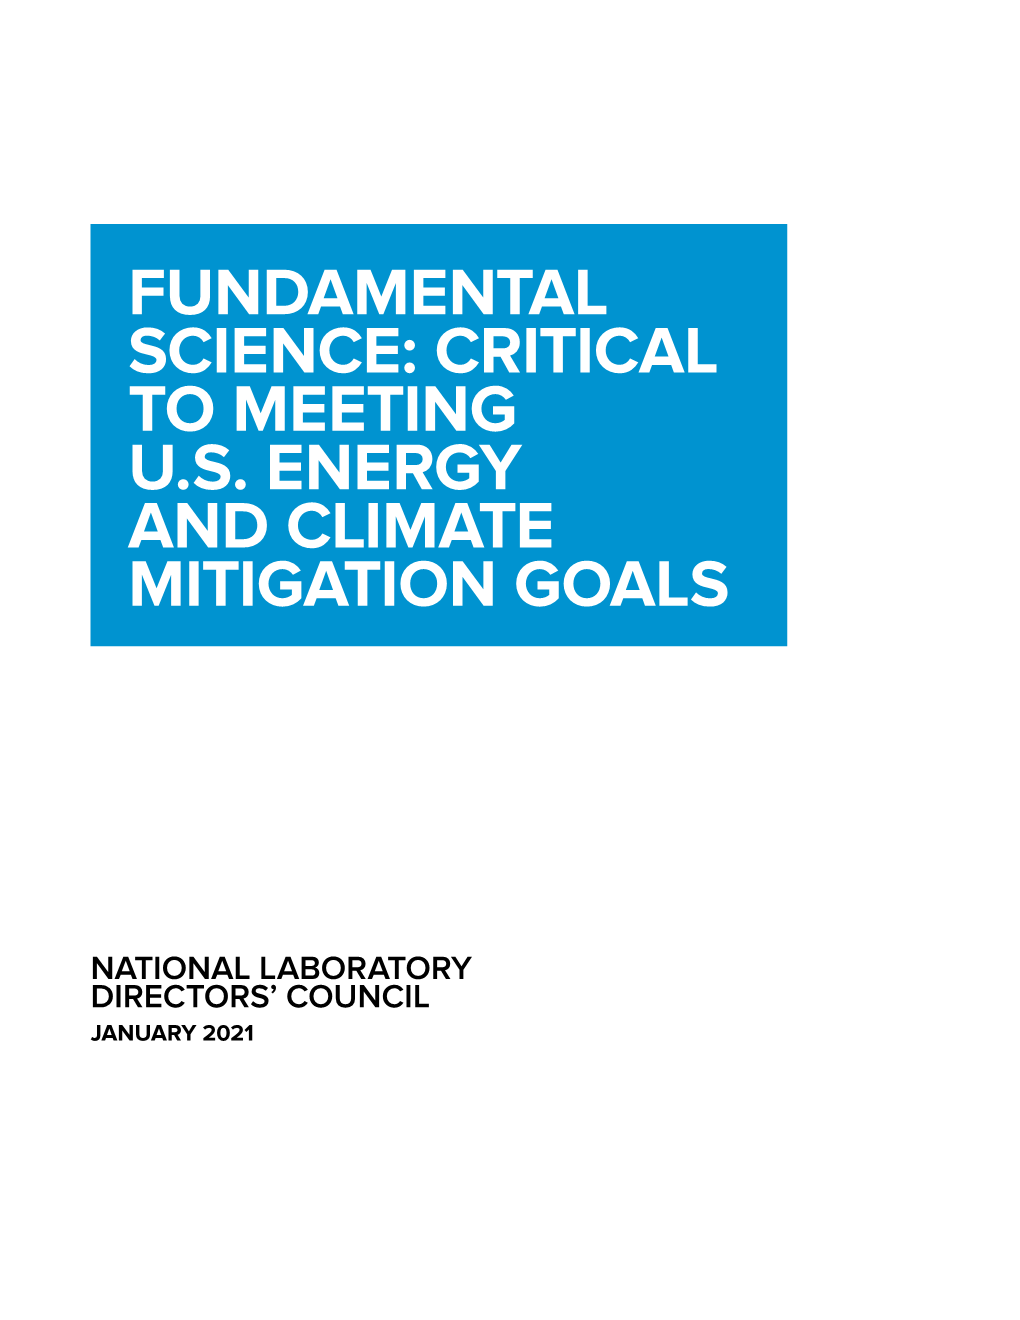 Fundamental Science: Critical to Meeting U.S. Energy and Climate Mitigation Goals